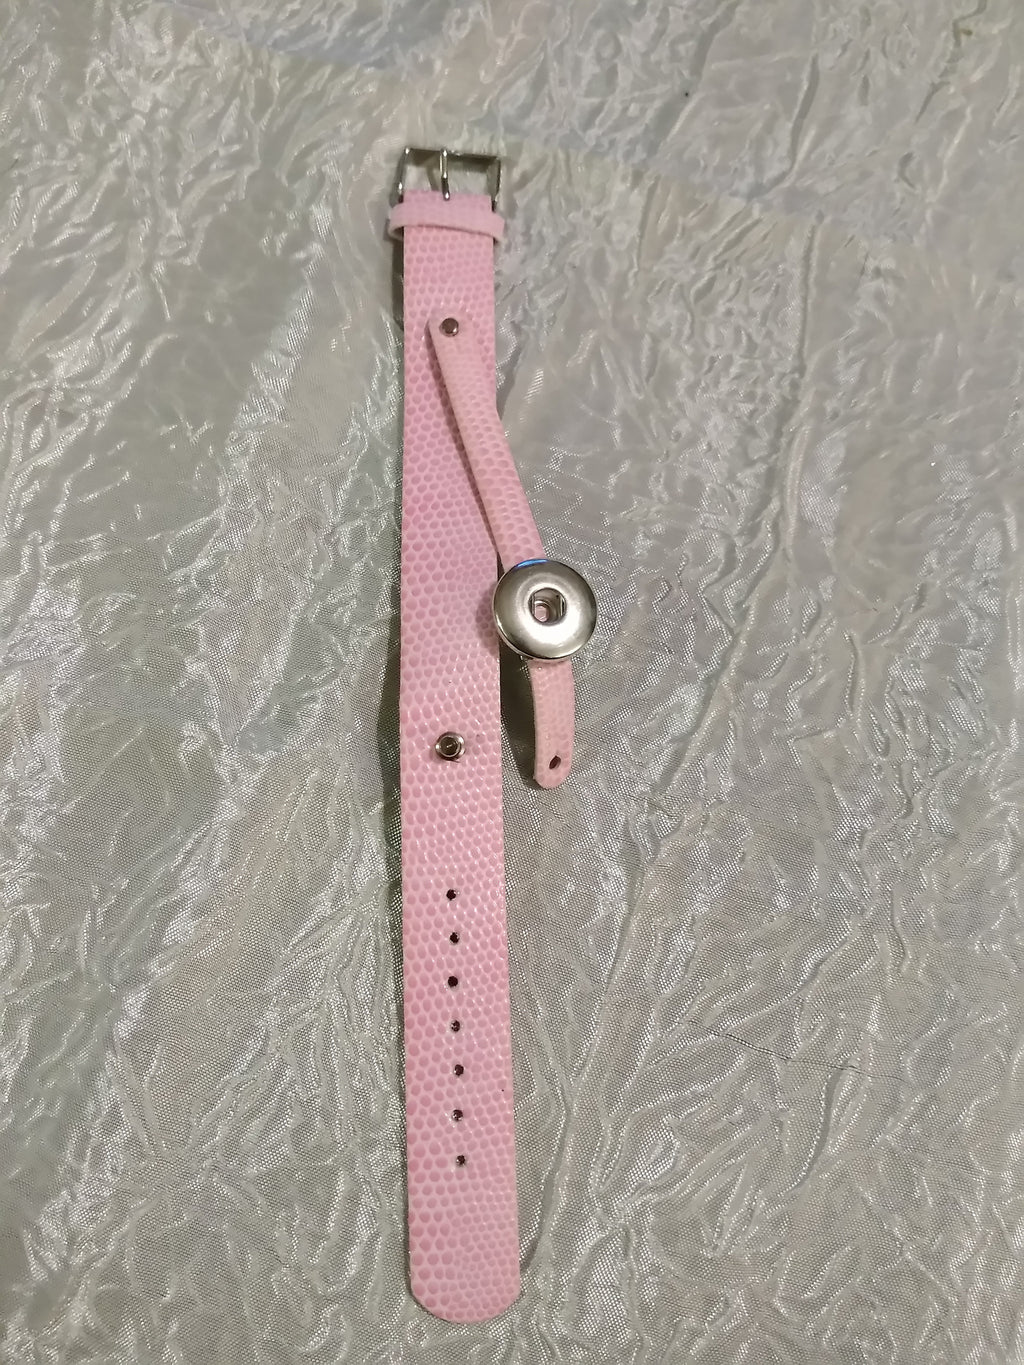 Hot 🔥 new snap jewelry Leather pink bracelet 18mm snap